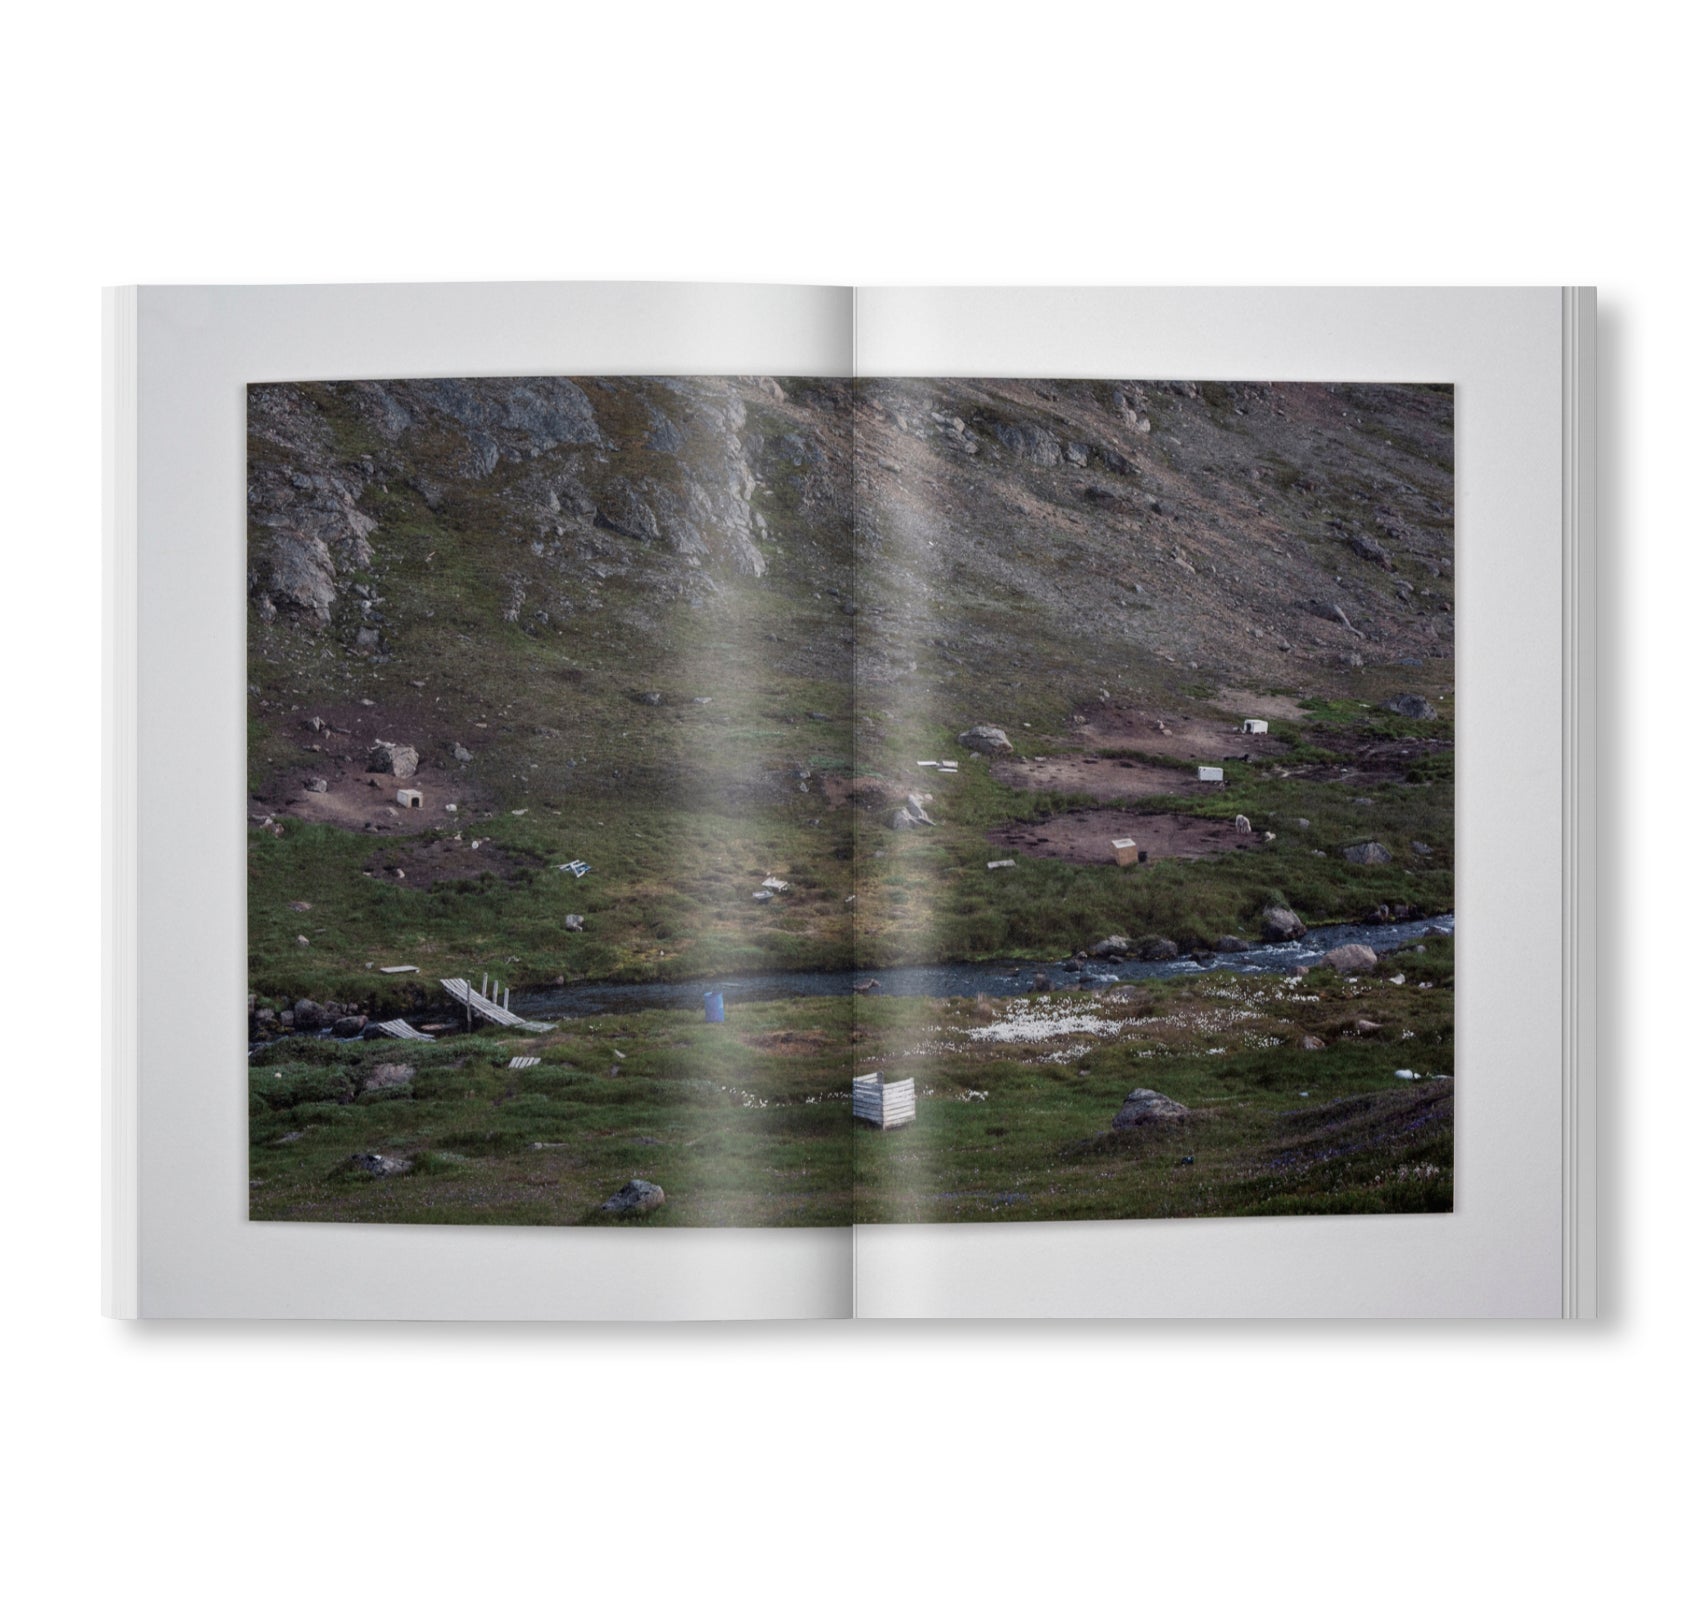 MOVING THROUGH THE SPACE OF THE PICTURE AND THE PAGE - THE PHOTOBOOK AS AN ARTISTIC AND ARCHITECTURAL MEDIUM by Stefan Vanthuyne